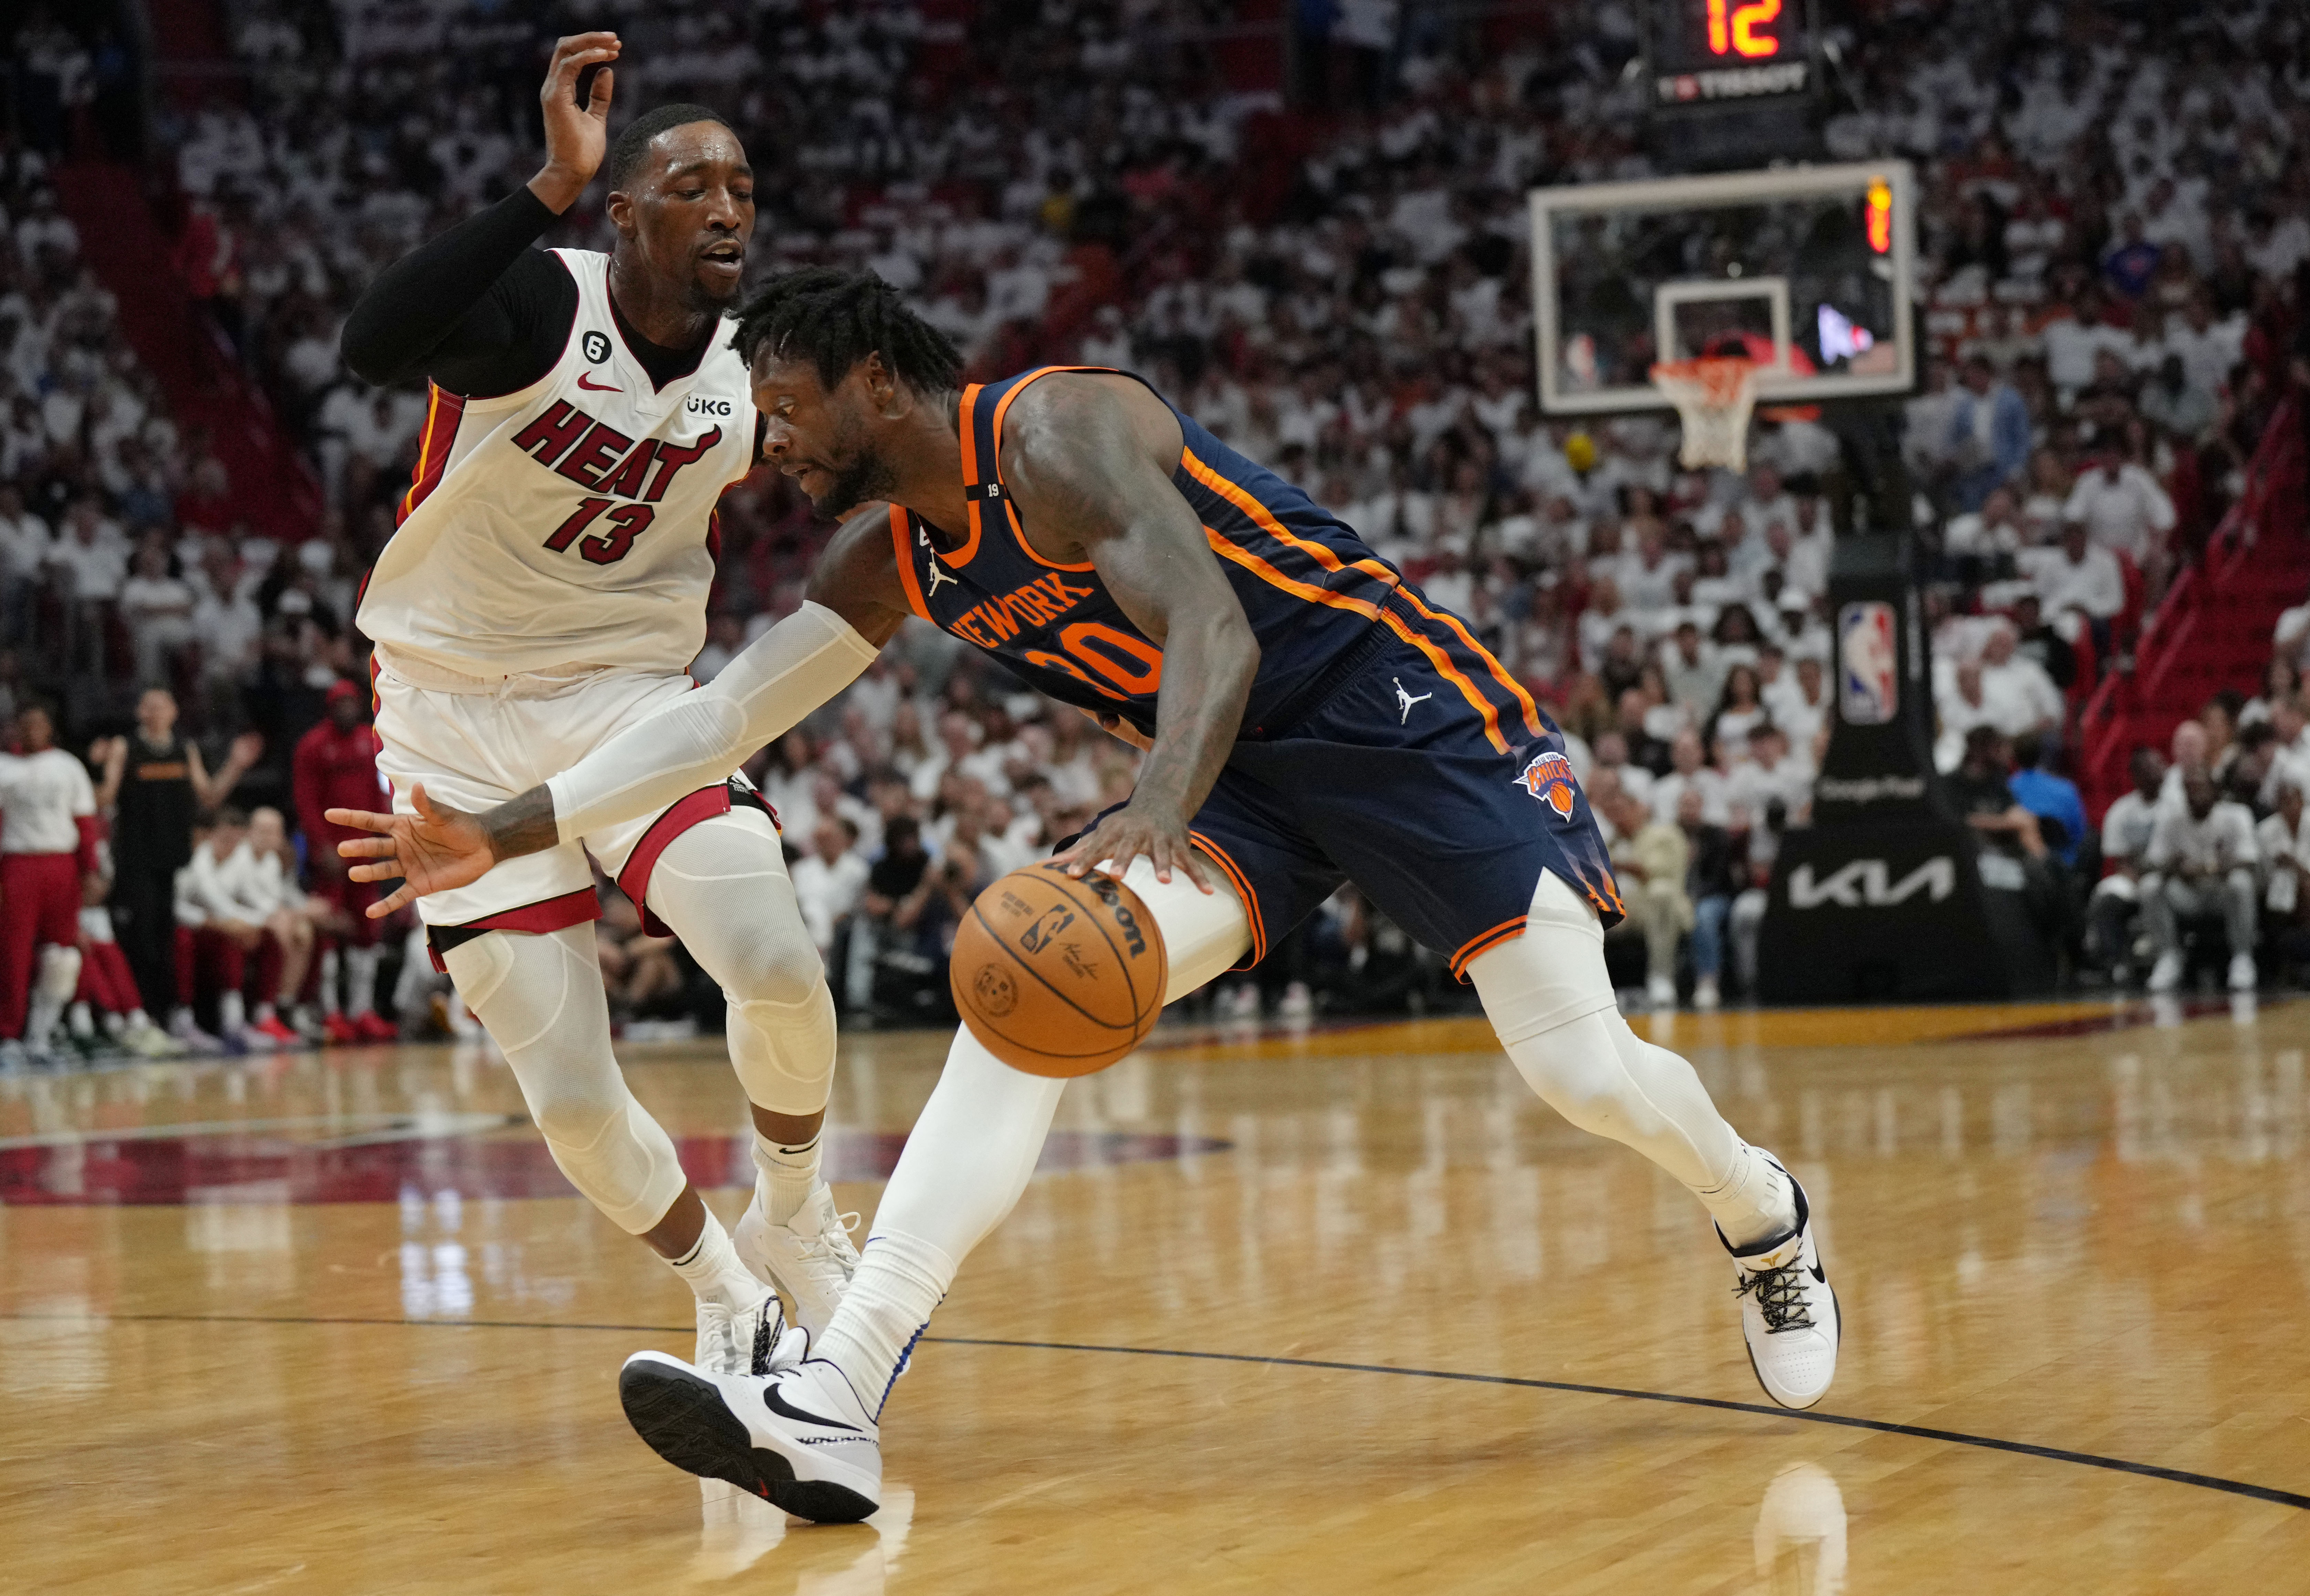 NBA playoffs: How to watch the Miami Heat at New York Knicks Sunday